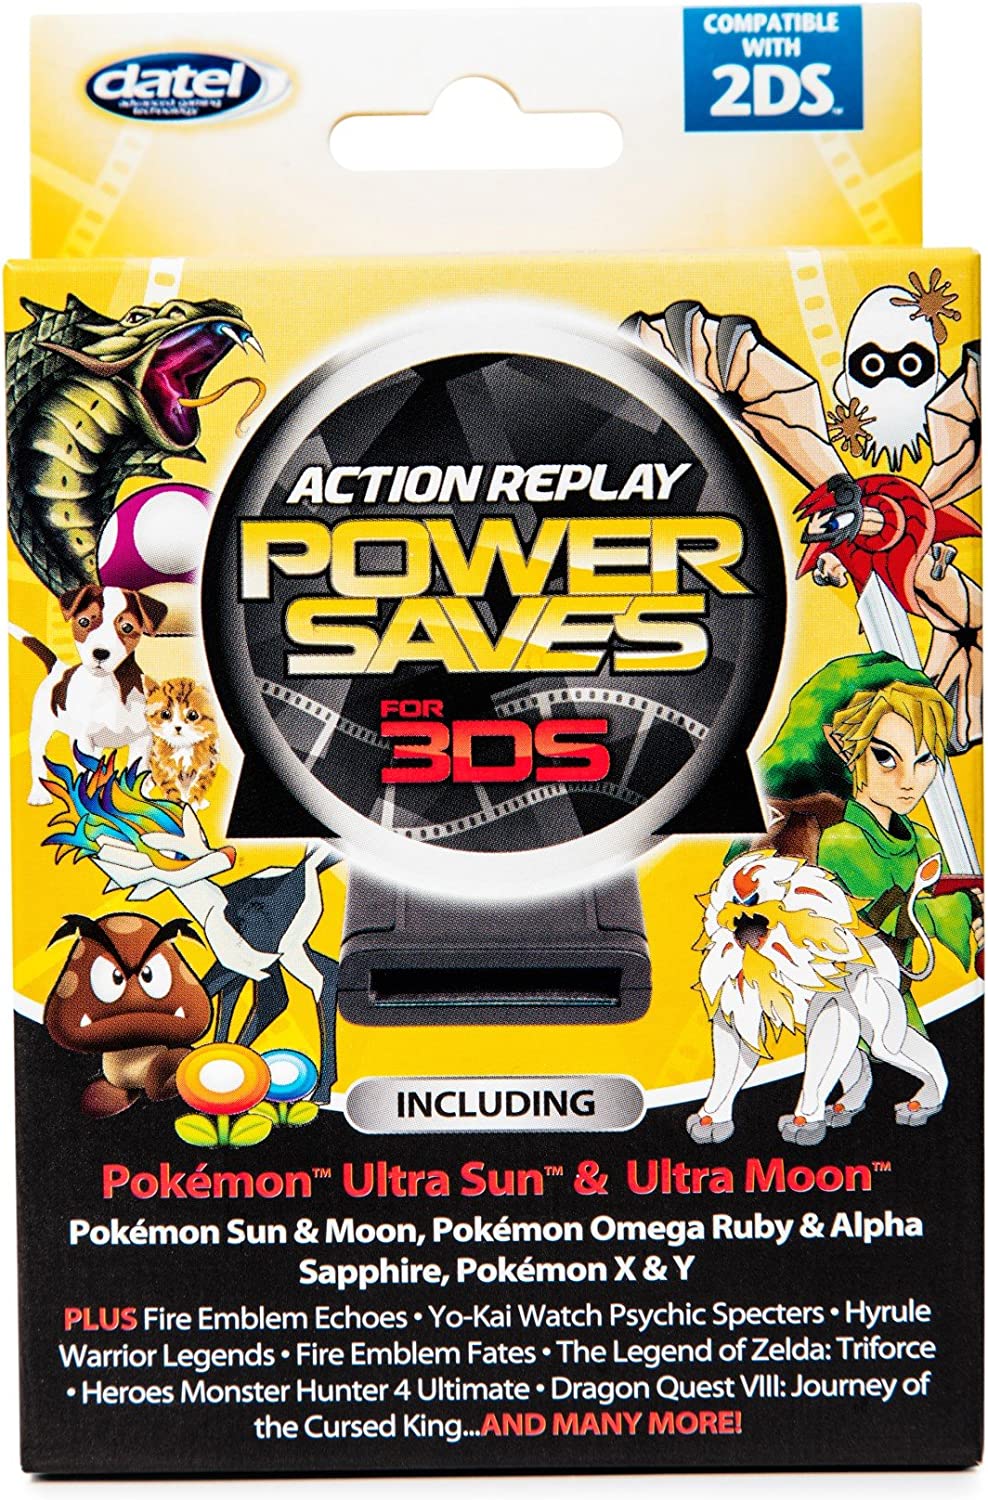 Action Replay Powersaves 3DS - 2018 Edition